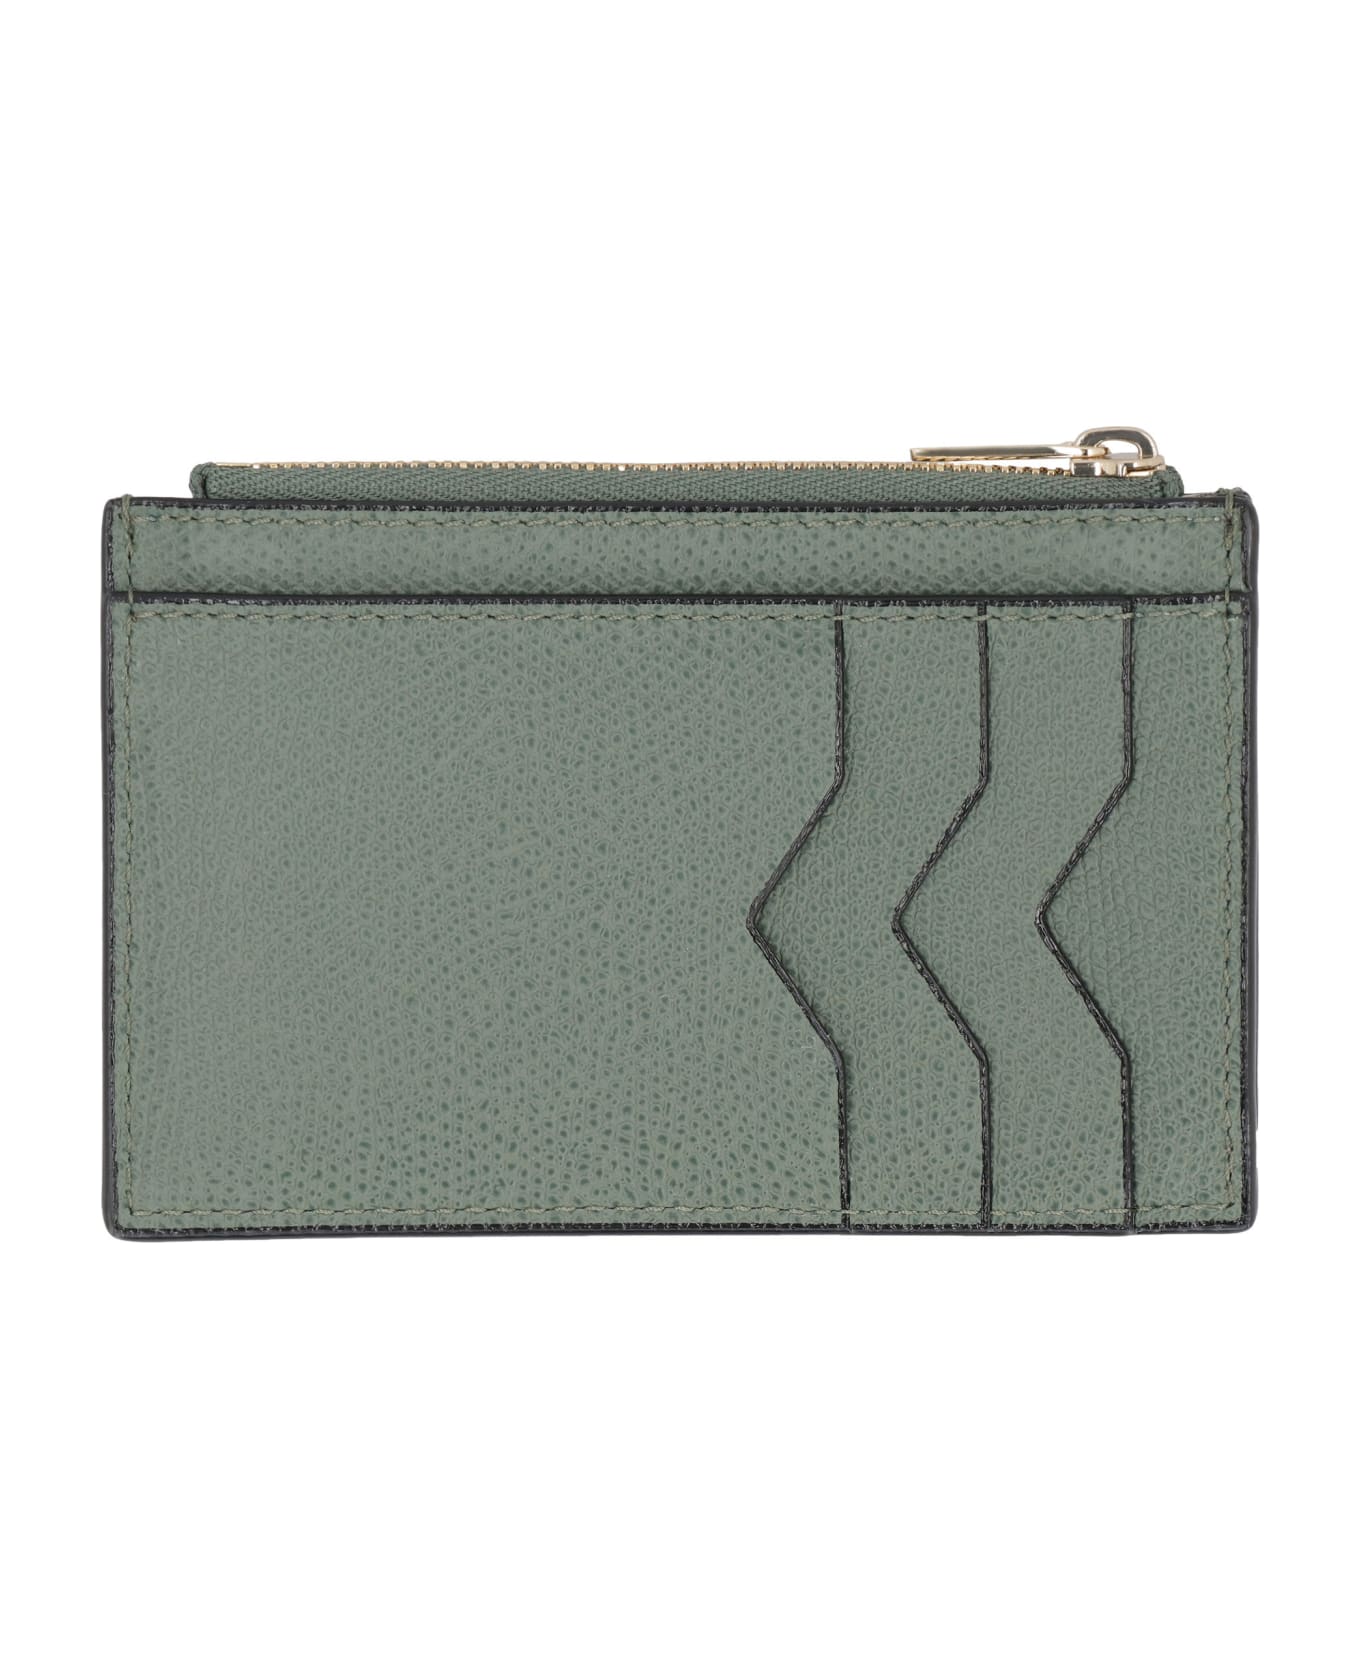 Valextra Leather Card Holder - green